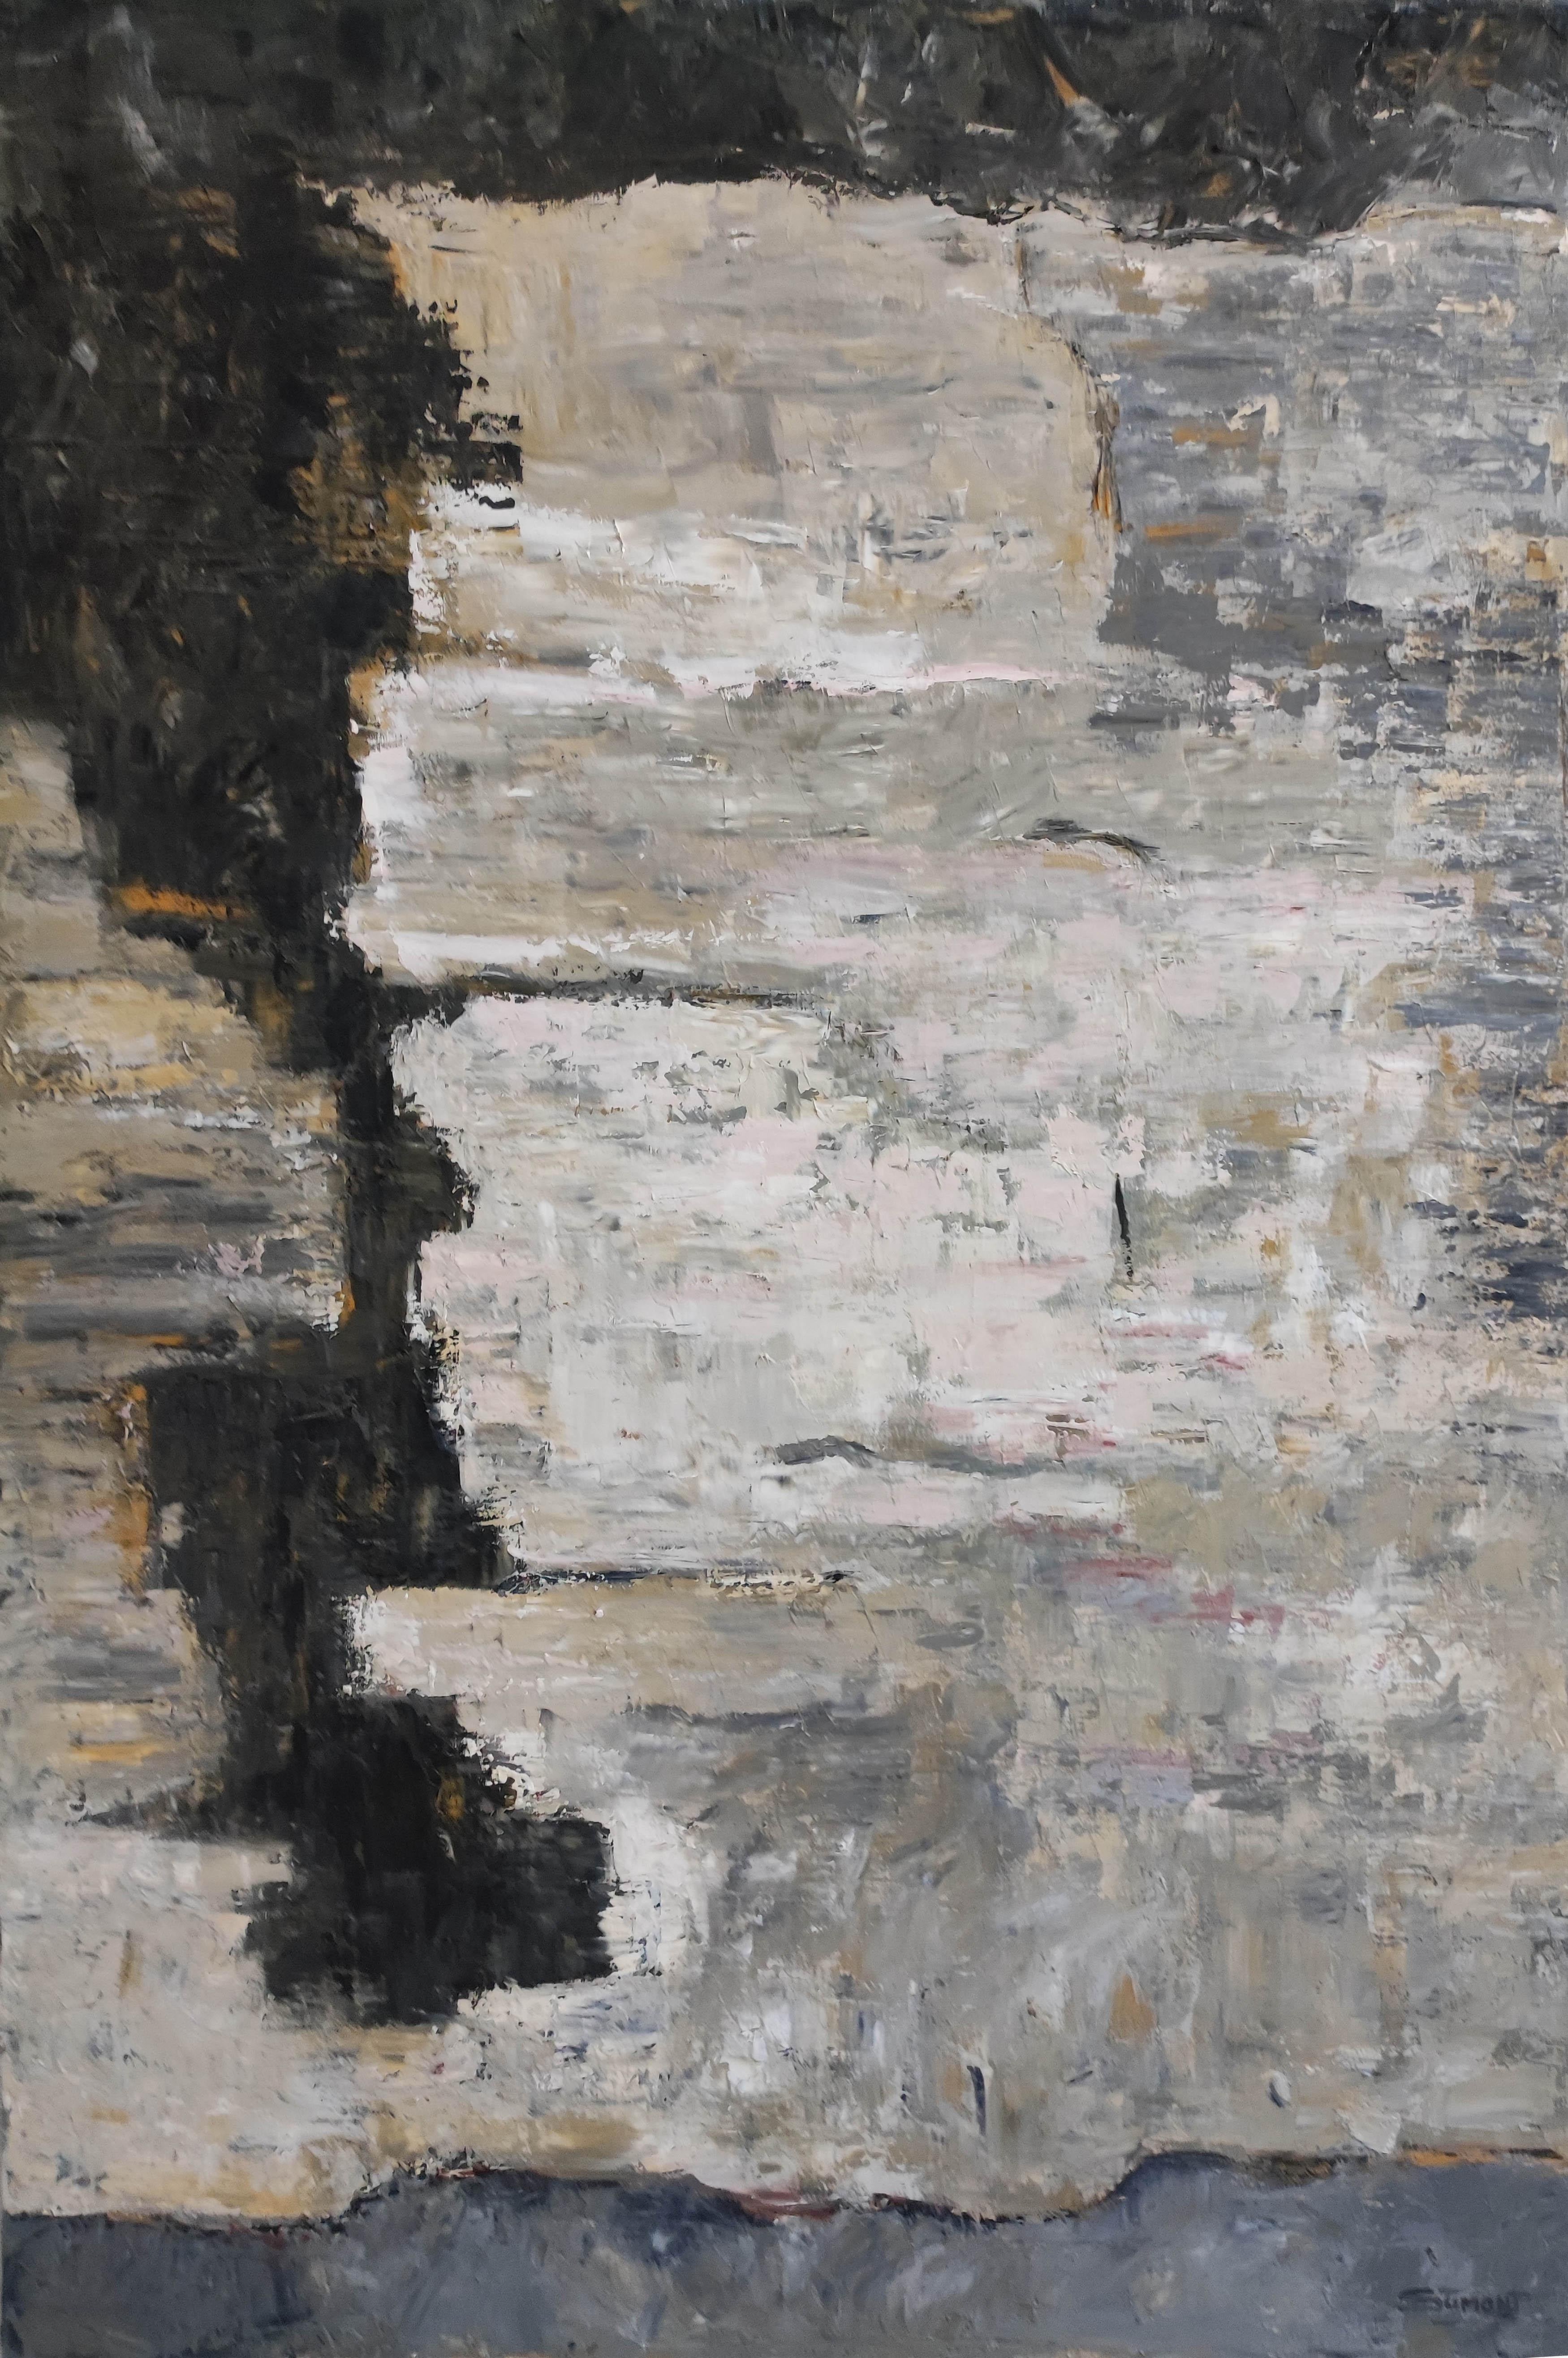 abstract cliffs worked in oil and painting knife.
Each diptych canvas is 130 x 97 cm
The size of the diptych is 130 x 194 cm
Sophie DUMONT explores the Norman universe.

She stubbornly probes the slightest vibrations of this familiar